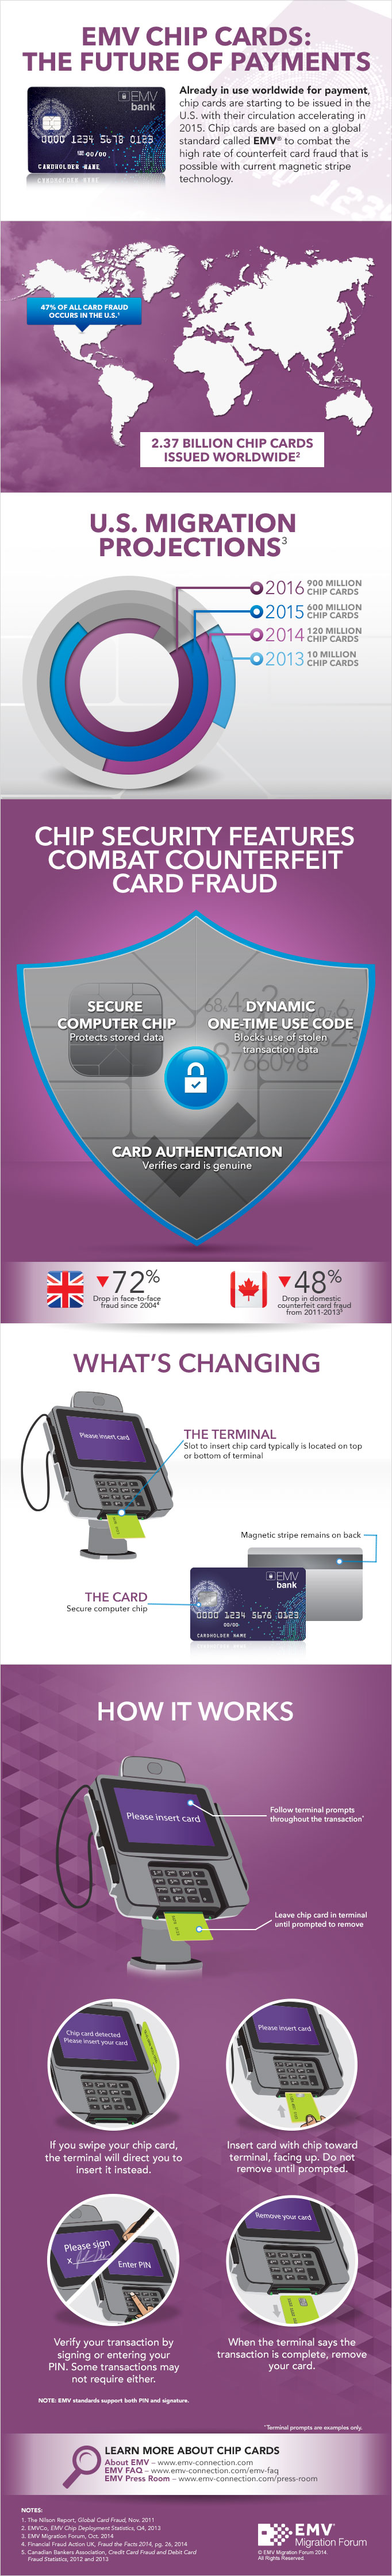 Infographic answers the key questions surrounding the U.S. migration to EMV chip cards for payment including what the migration is and when it will happen; the security features of chip cards; what will change for the consumer; and how the payment process works with chip cards.